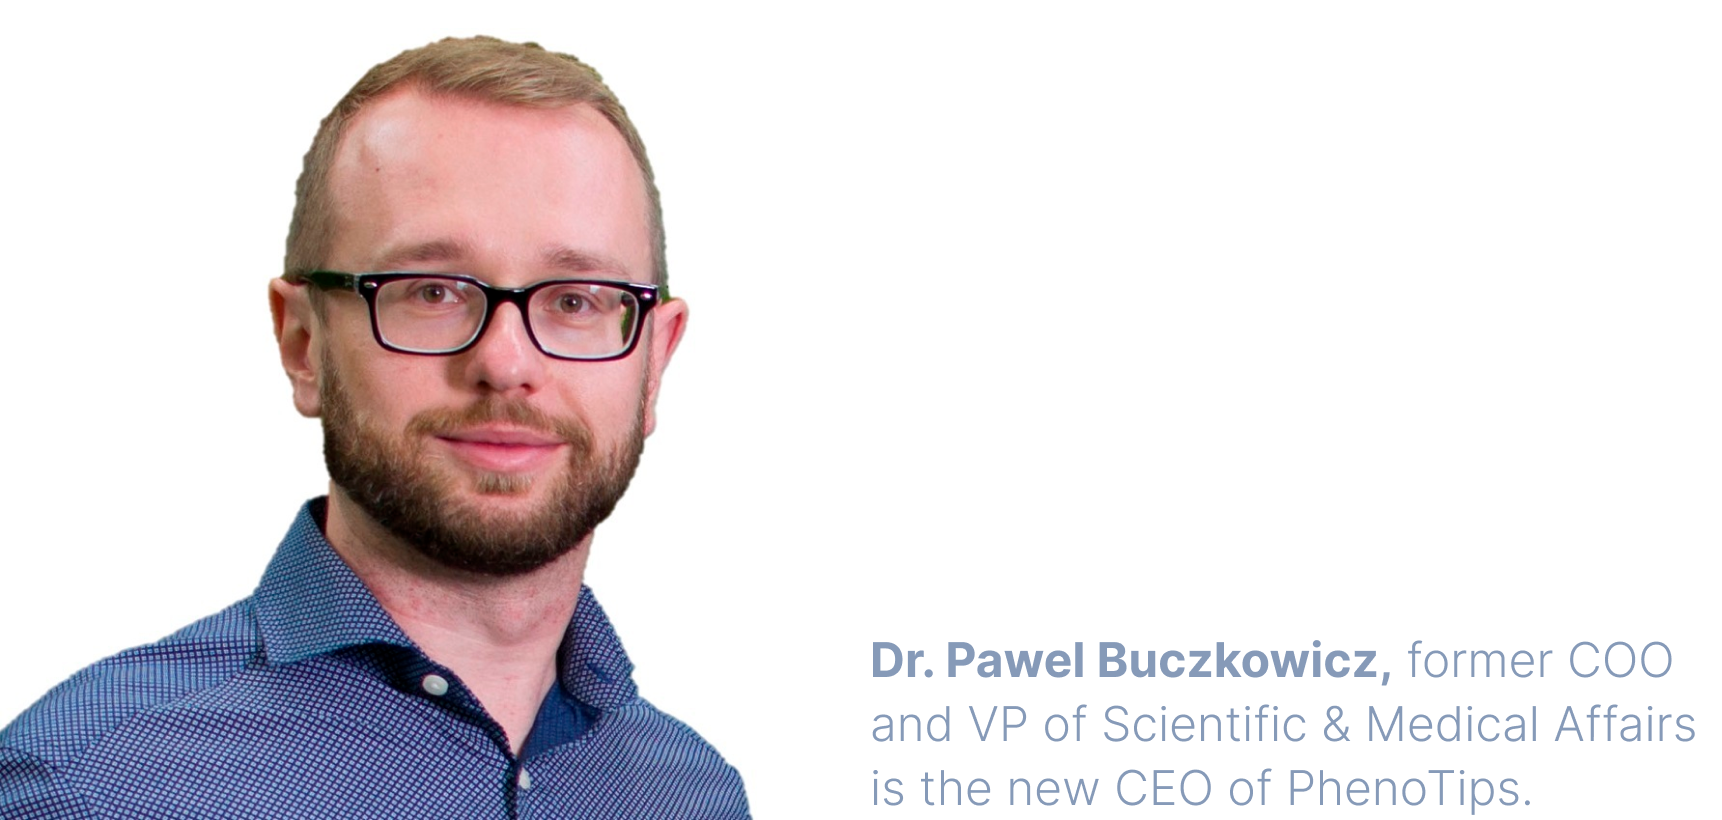 A professional headshot of Dr. Pawel Buczkowicz, a white adult man with short dark-blonde hair, a trim beard, and glasses. He smiles warmly at the camera while wearing a blue polkadotted dress shirt and standing in front of a white backdrop.